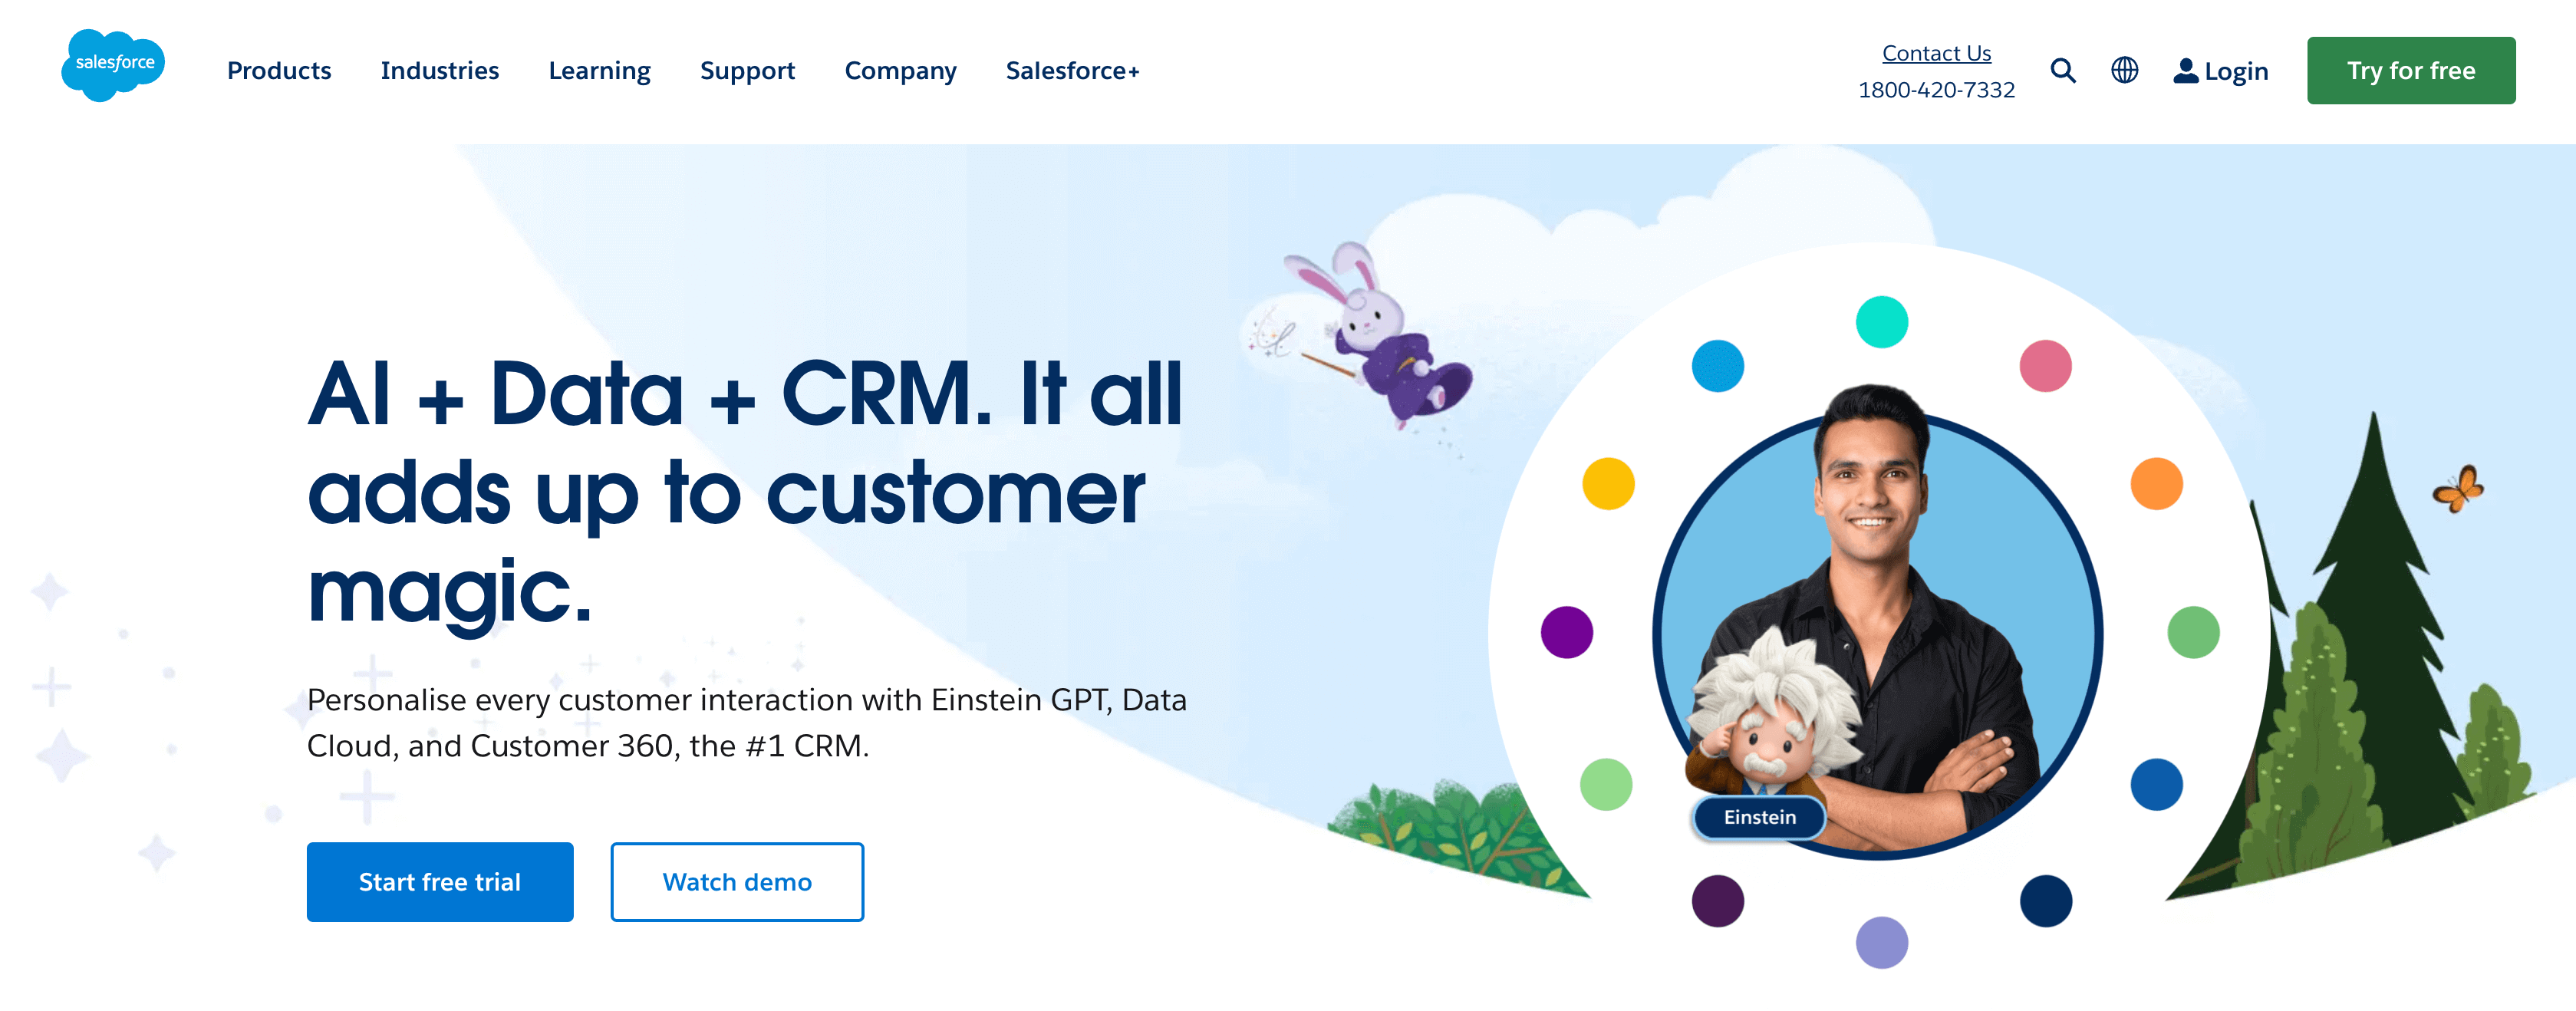 Salesforce CRM - Best CRM For Small Business